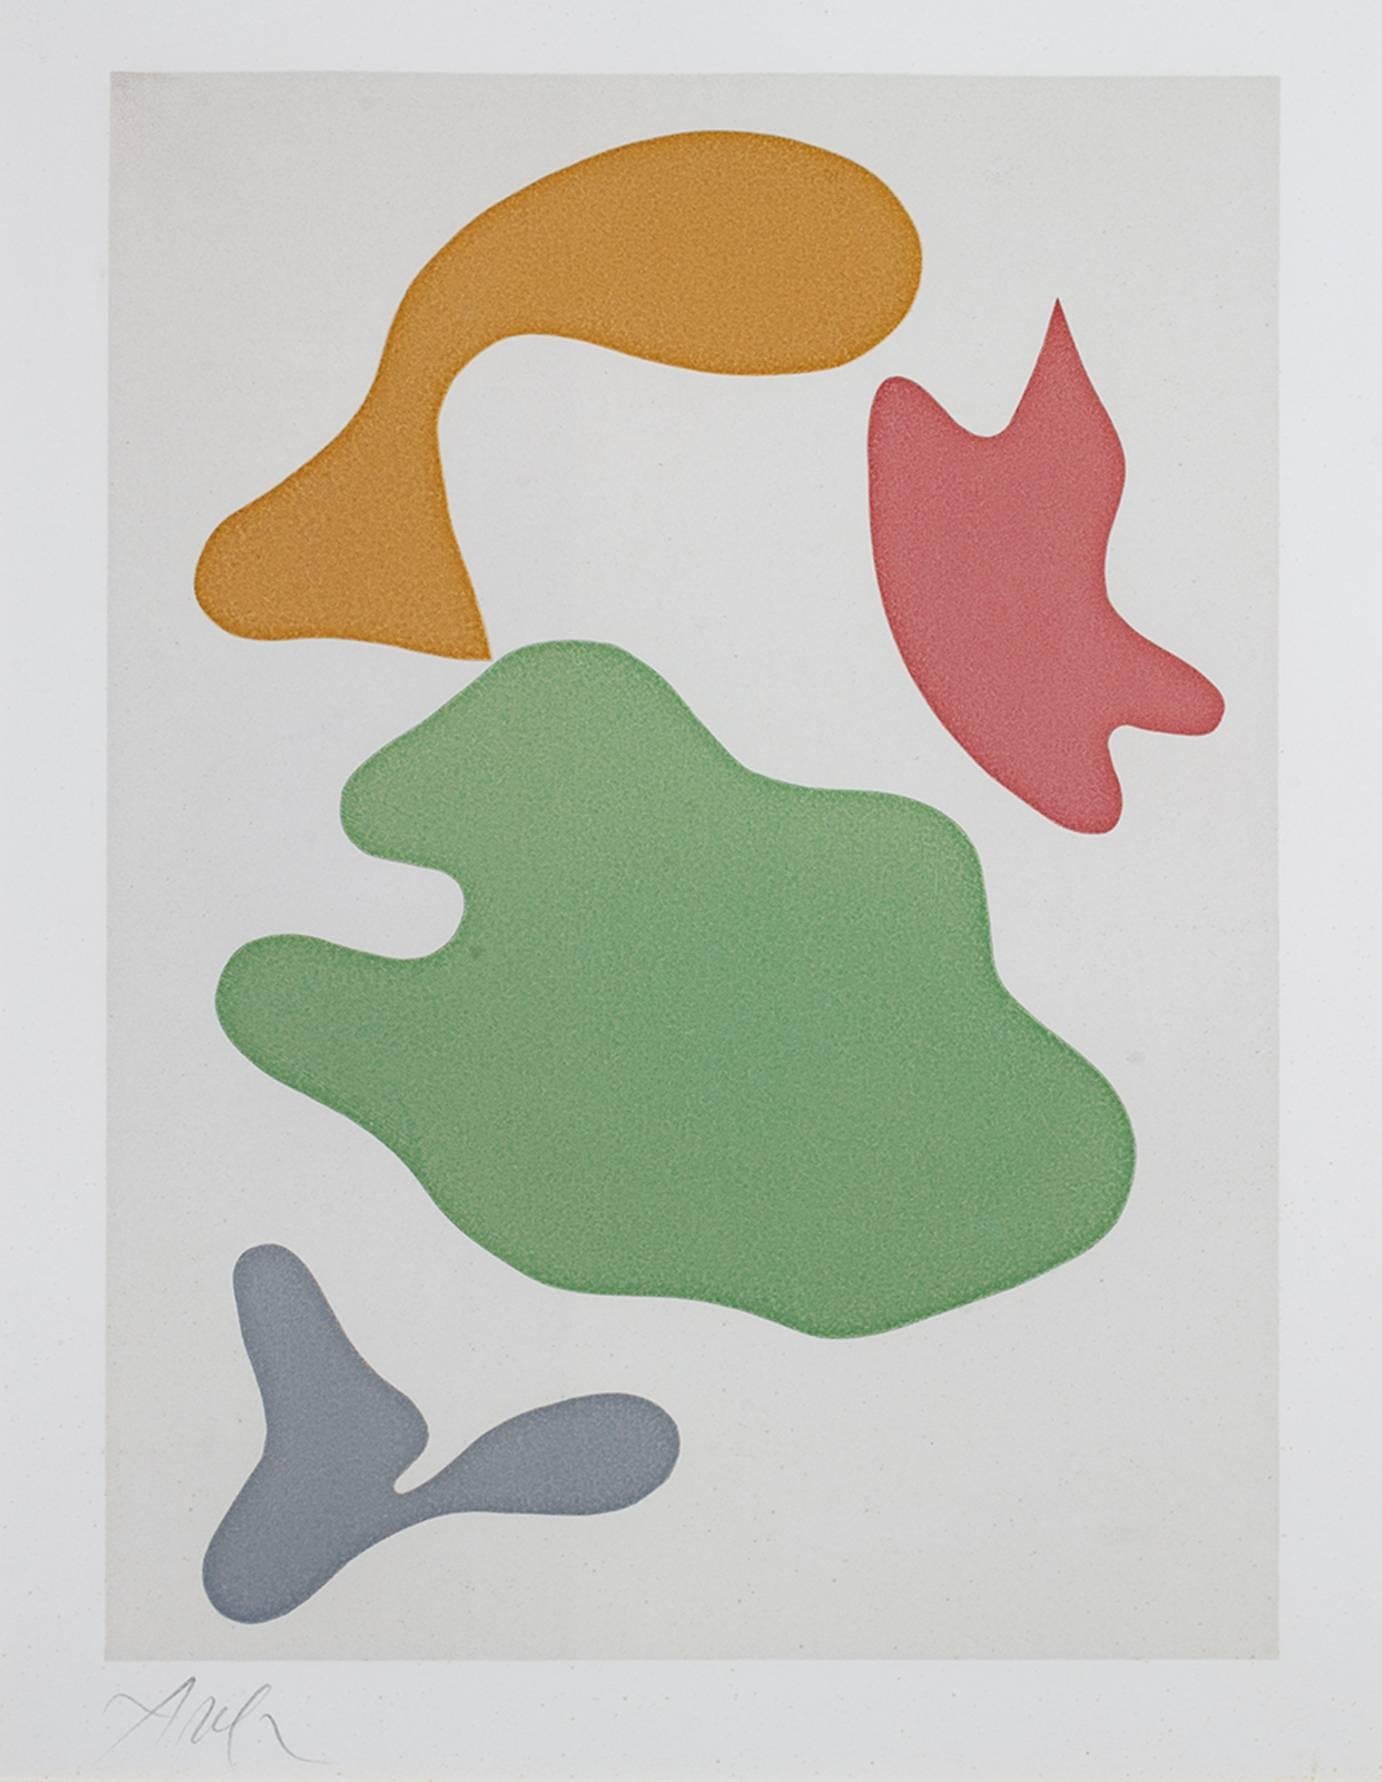 Hans Arp Abstract Print - "Constellation, " original color woodcut, edition of 75 by Jean (Hans) Arp